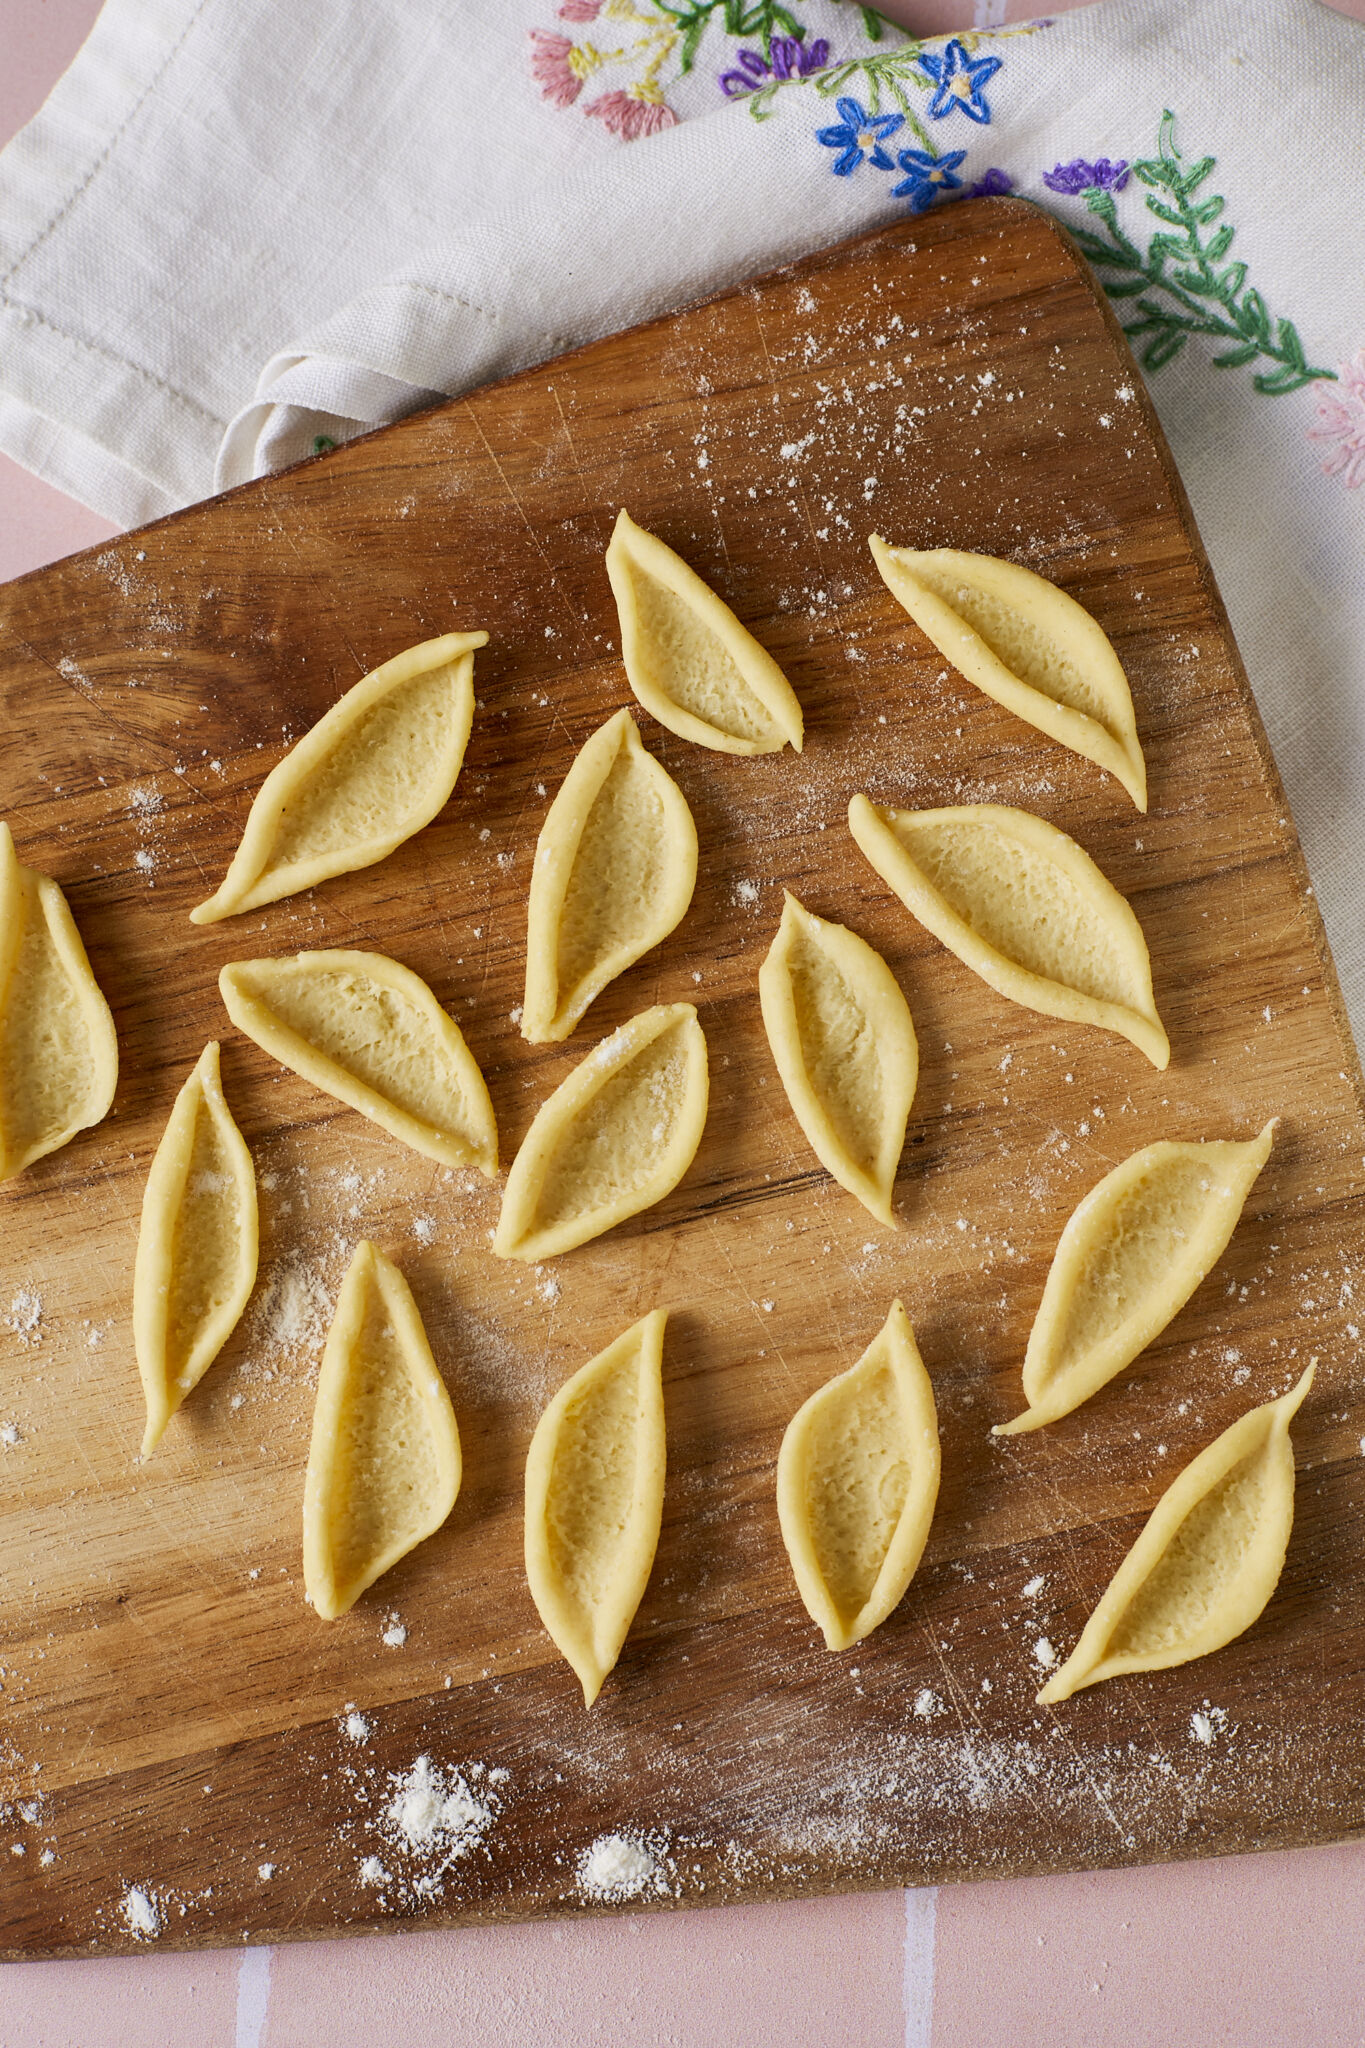 Olive Leaf Pasta is placed on a lightly floured wood board. Foglie d'Ulivo is in elongated, shell-like shape which is big enough to work in a variety of dishes and perfect for capturing every bite of sauce.